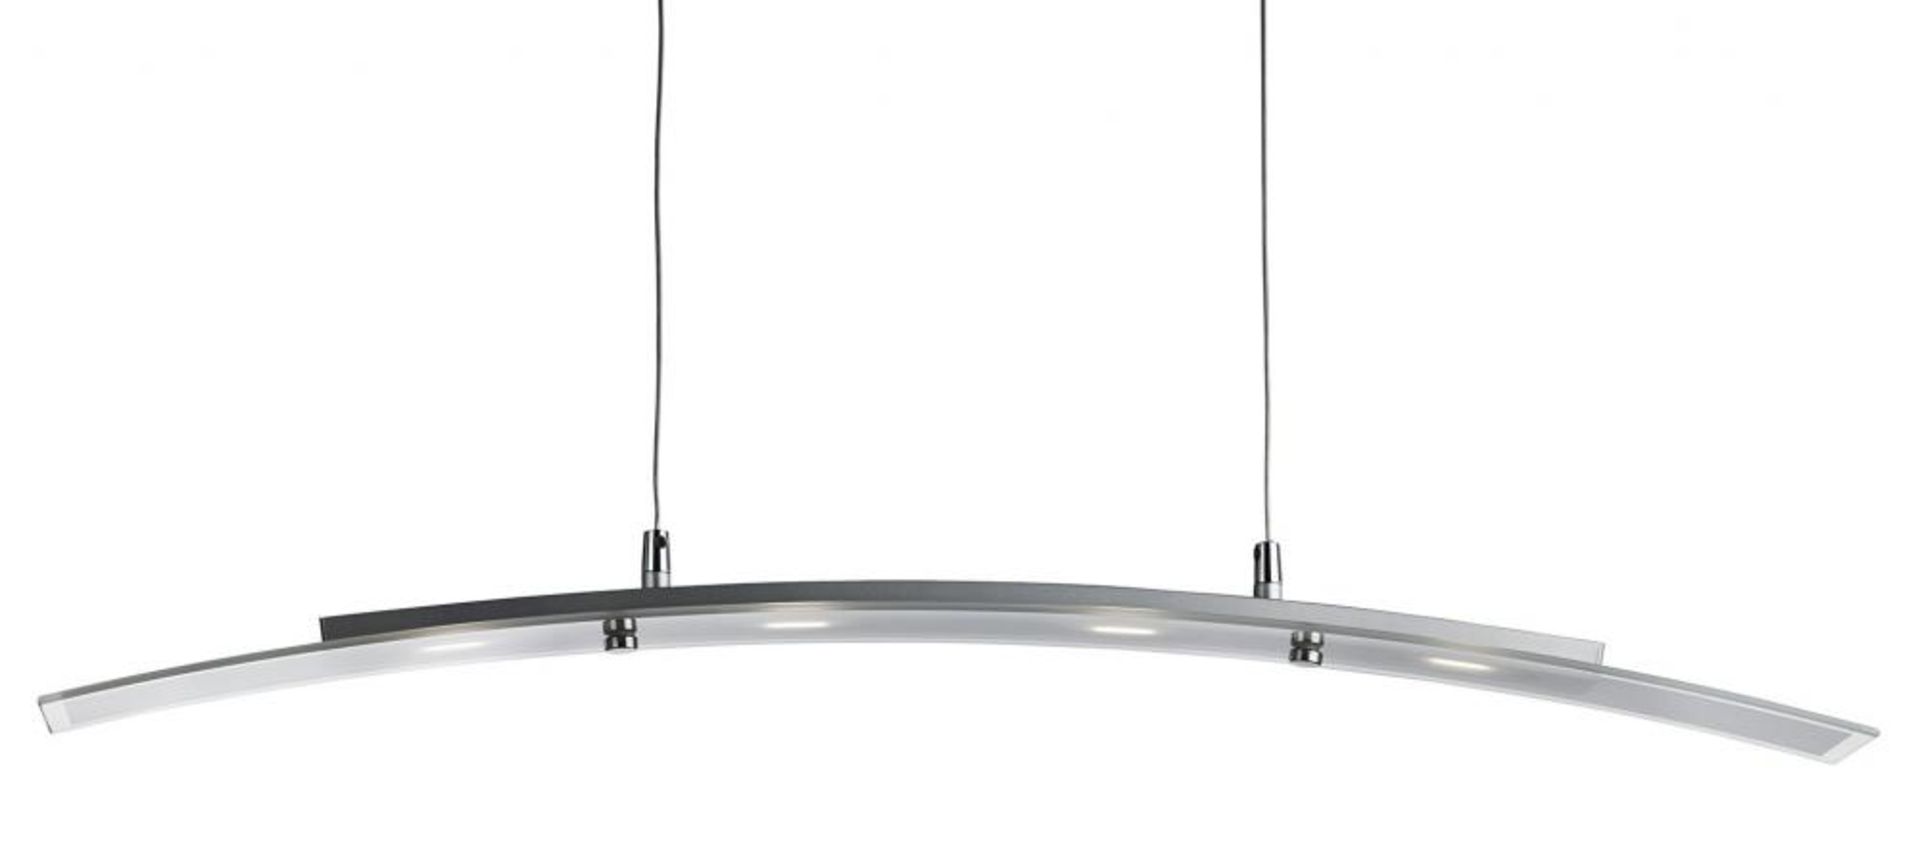 1 x Satin Silver 4 Led Curved Bar Light With Clear & Frosted Glass - Adjustable Height